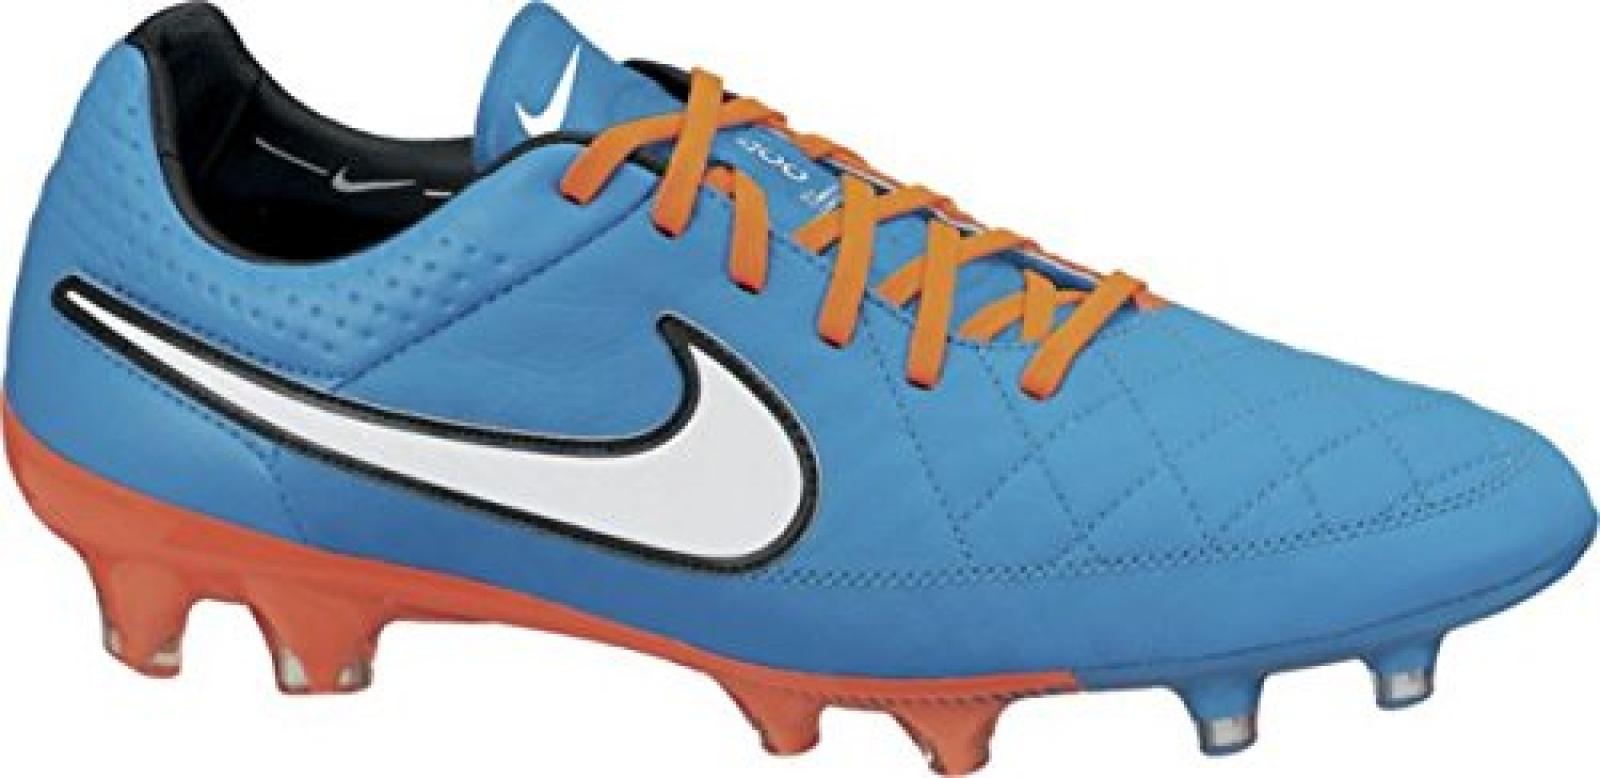 Nike Tiempo Legend V Fg mdnght nvy/drk obsdn-drk obsdn 